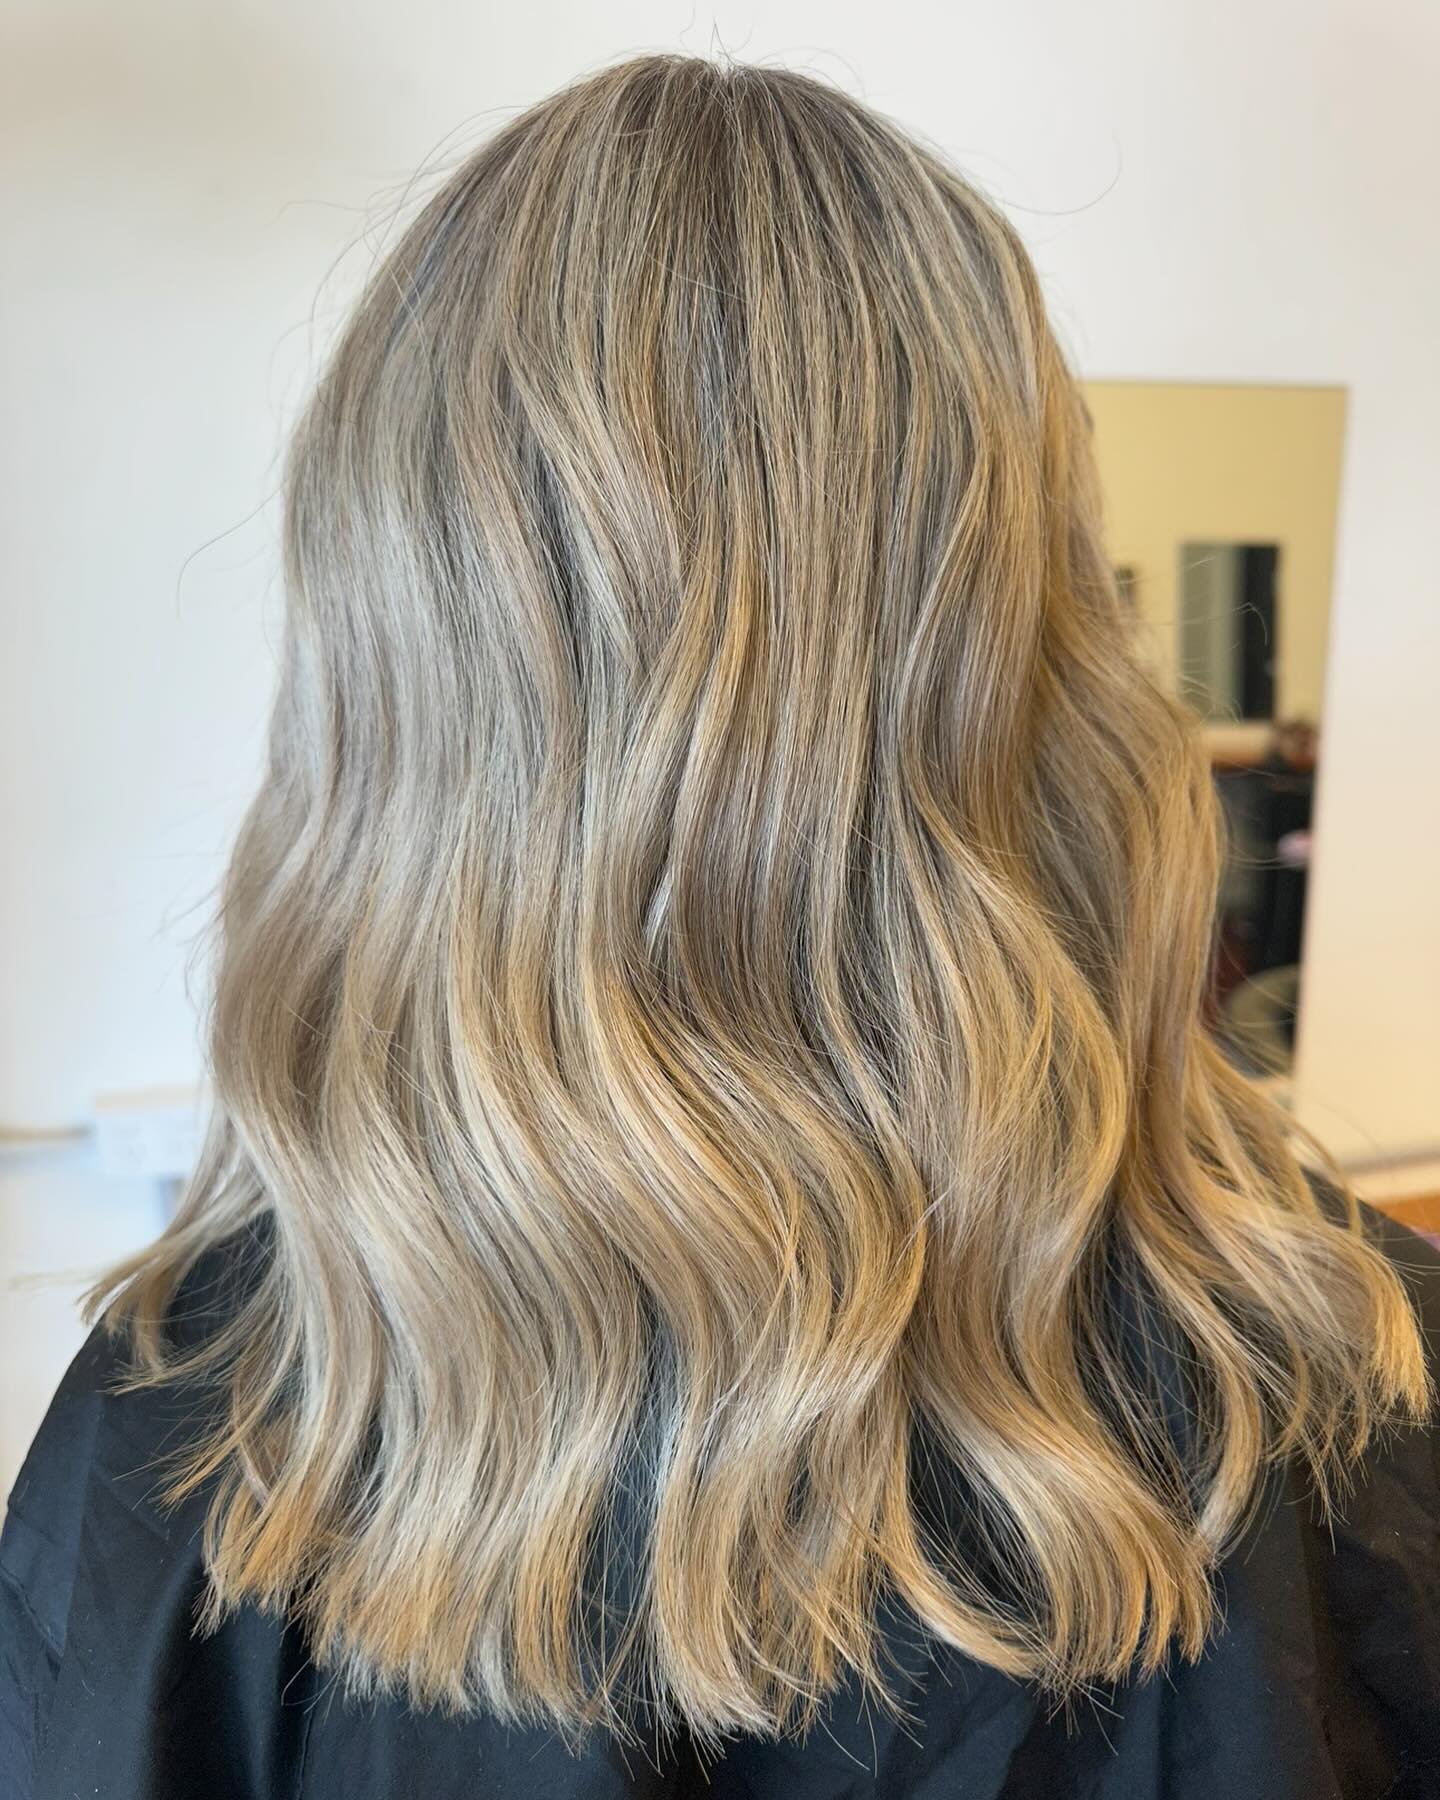 Refreshing Blonde!!

On this hair we did a full head of foils with an ashy toner. We made a big decision to go shorter but we LOVE how full, fresh and healthy this hair lookes.

Swipe to see the before 

Double tap if you like it as much as us.

Let&